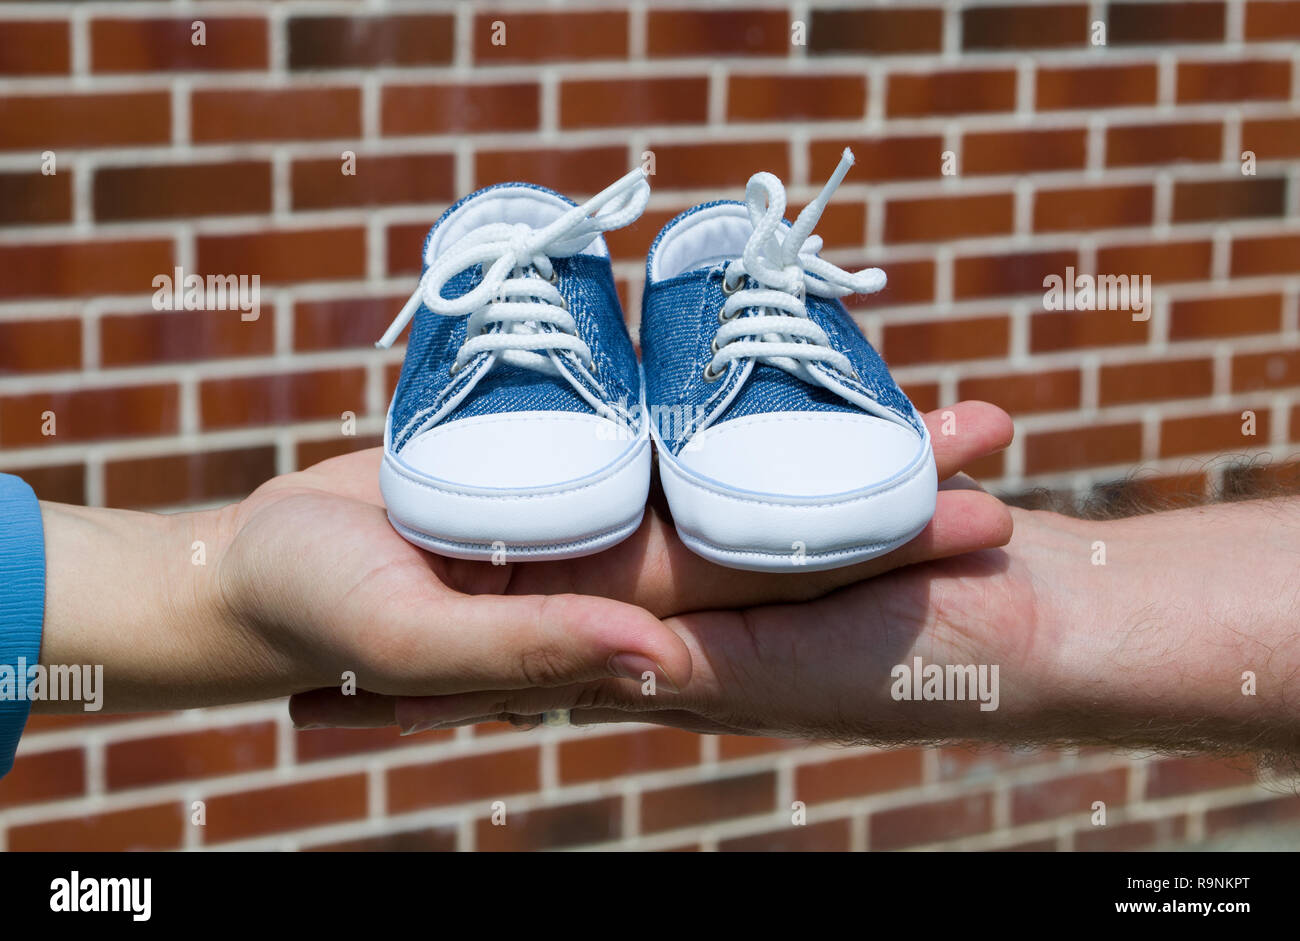 Future parents holding baby shoes Stock Photo